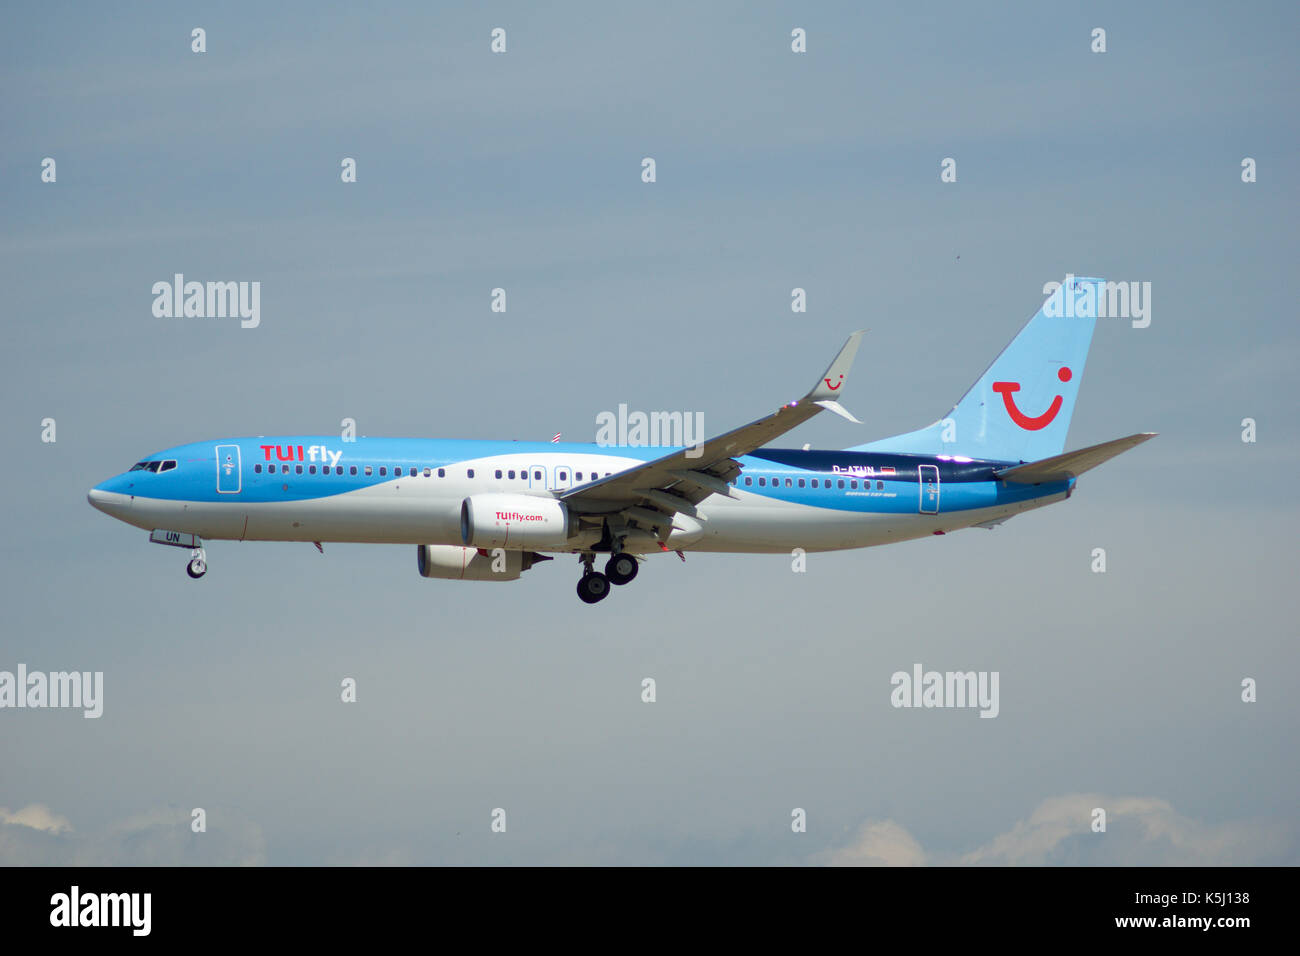 FRANKFURT, GERMANY - JUL 09th, 2017: TUIfly AIRLINES Boeing 737-800 lands at Frankfurt airport, Boeing 737 Next Gen, MSN 41660, Registration D-ATUN, TUIfly-a German leisure airline owned by the travel and tourism company TUI Group Stock Photo